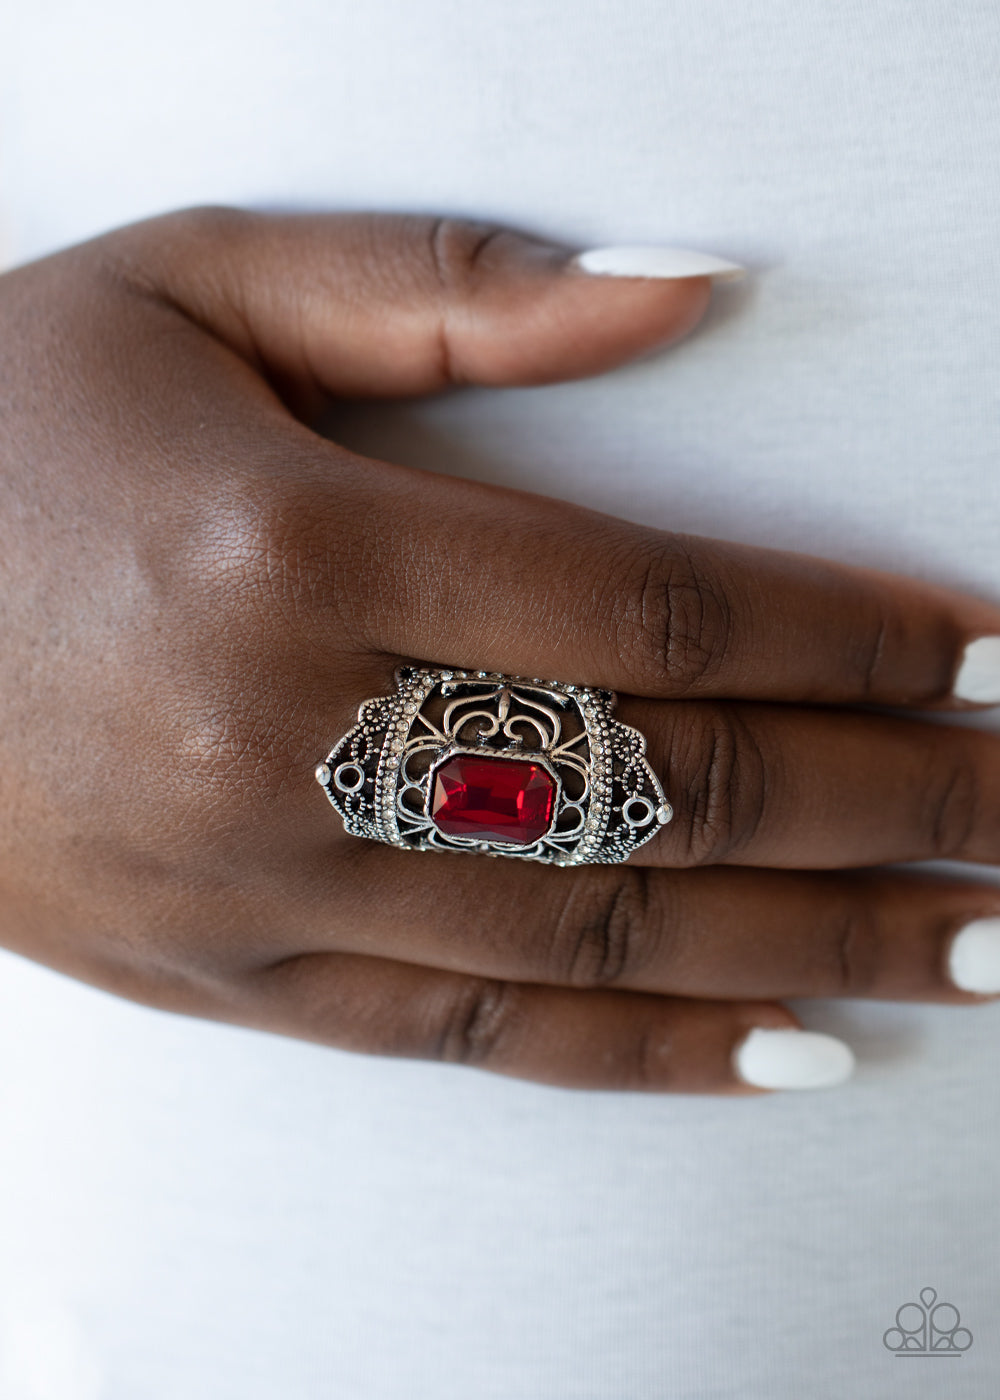 Undefinable Dazzle Ring - Red